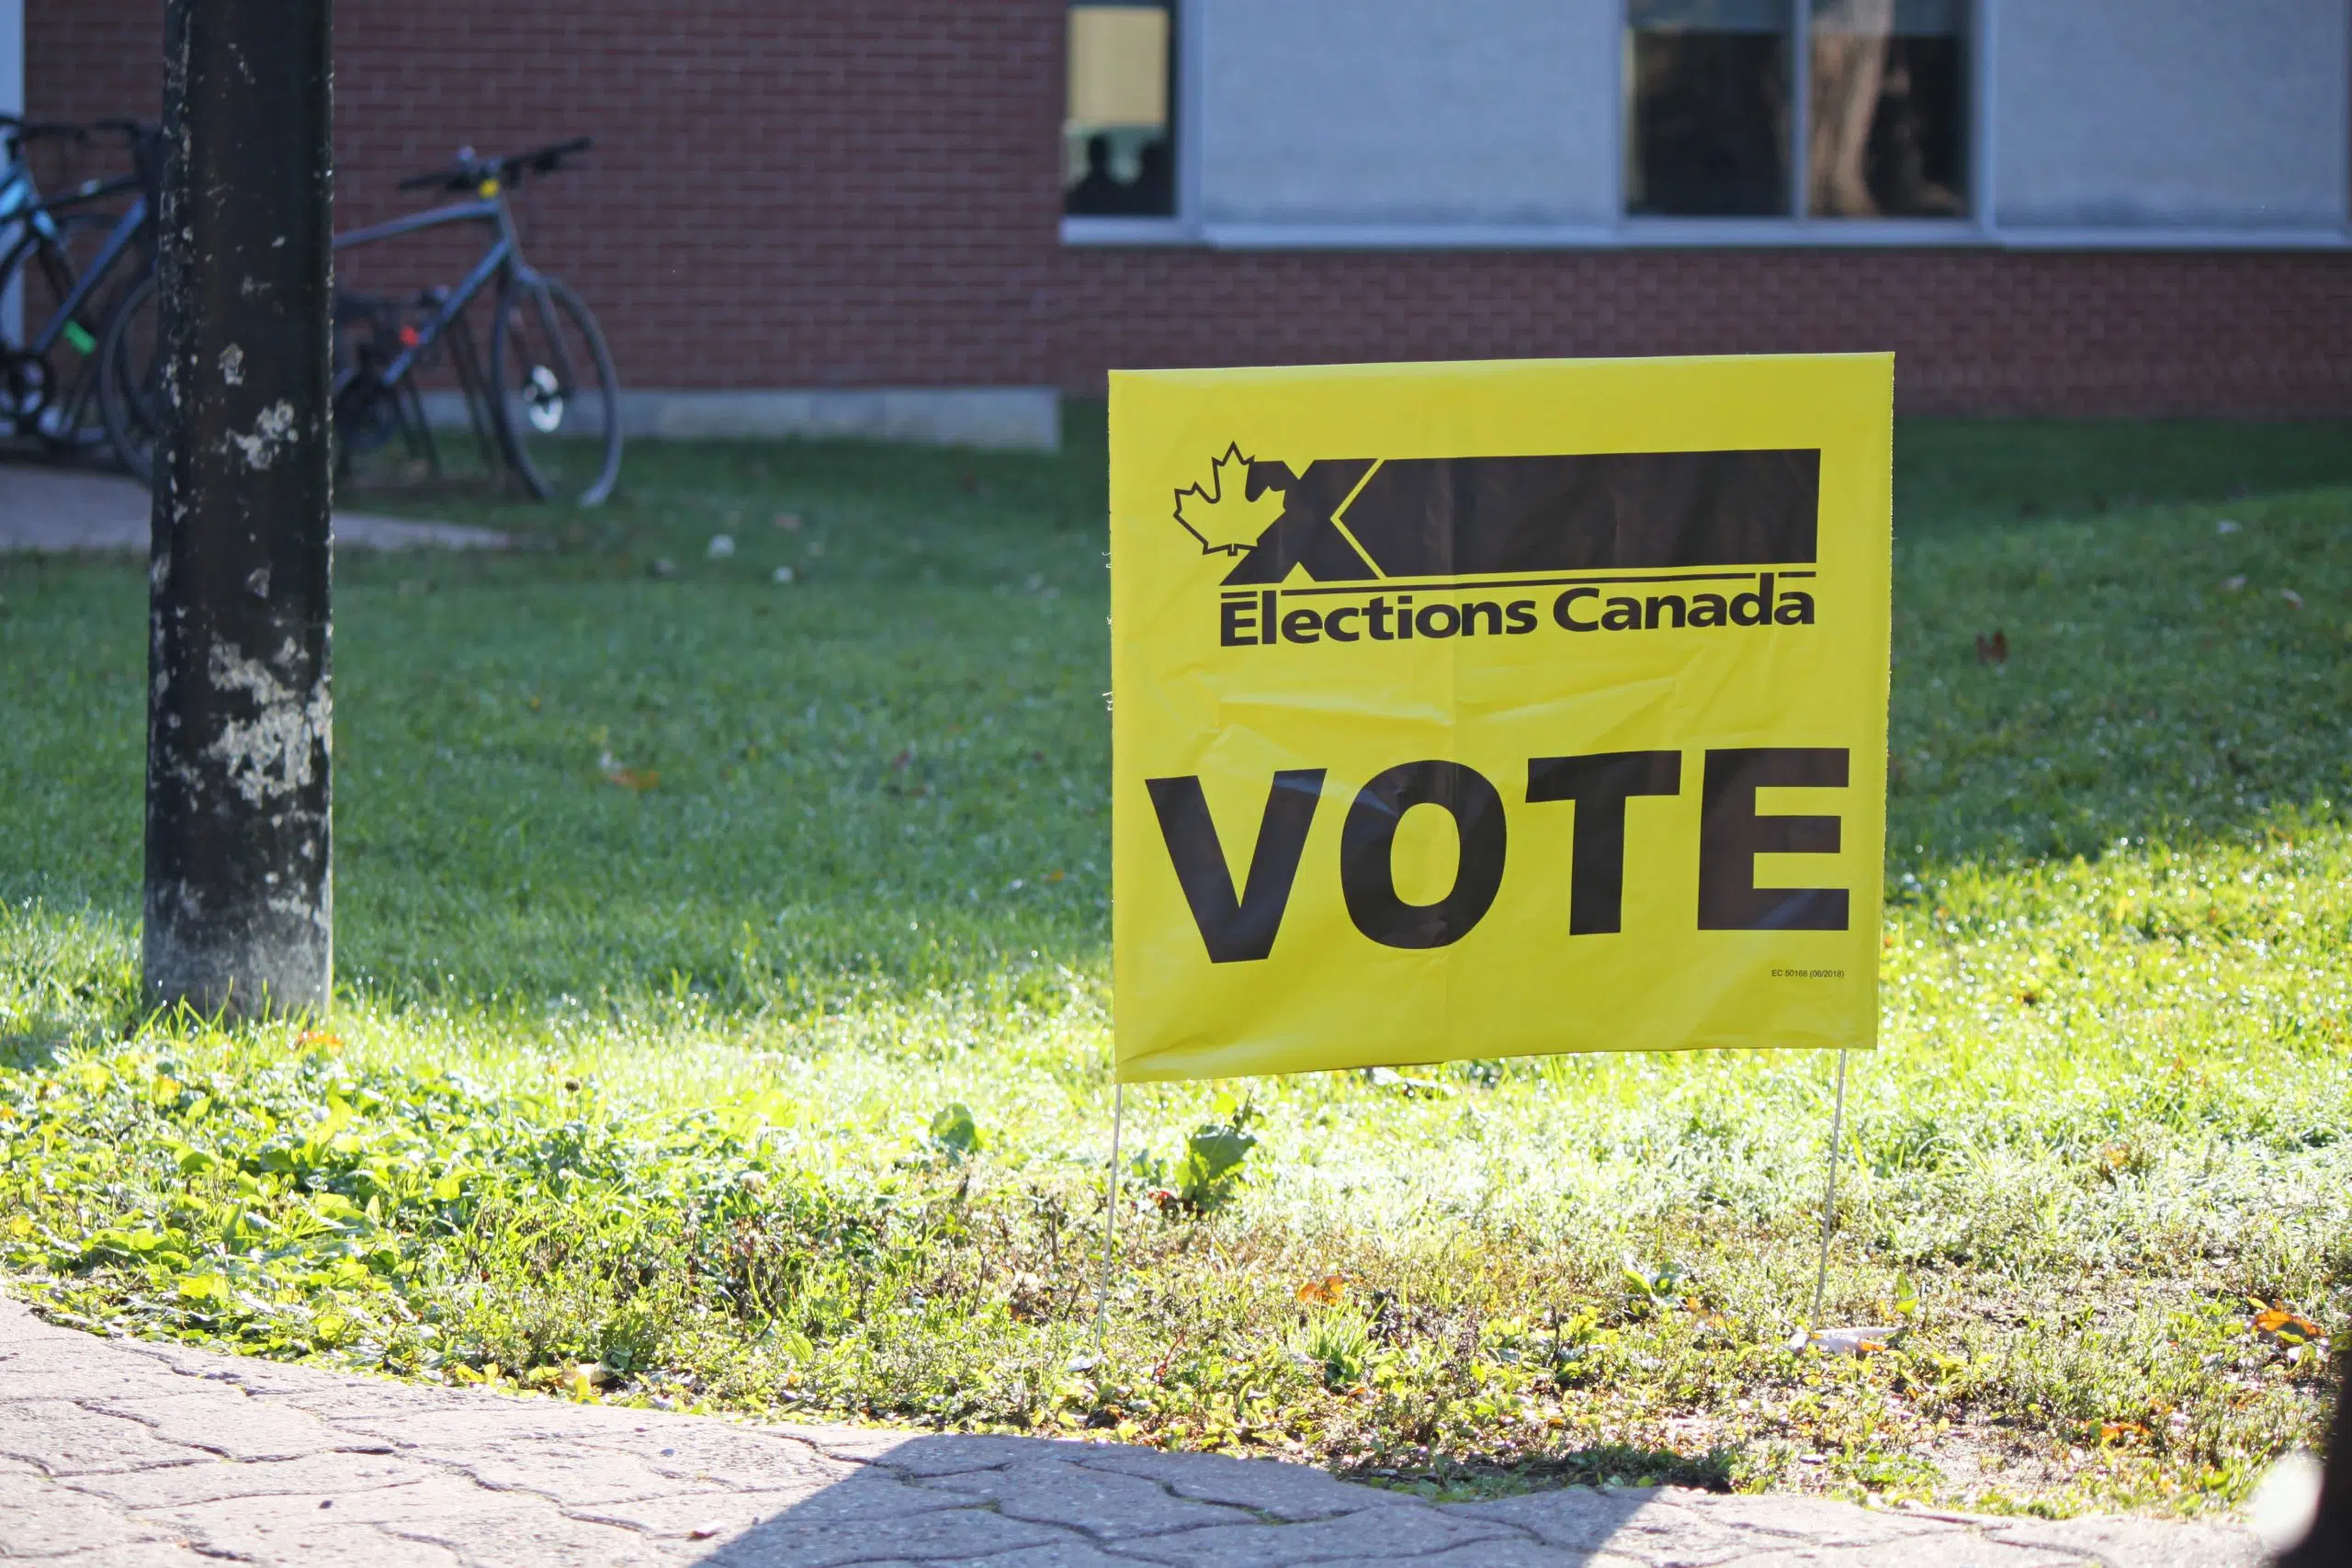 Elections Canada Officially Confirms Candidates For Federal Election